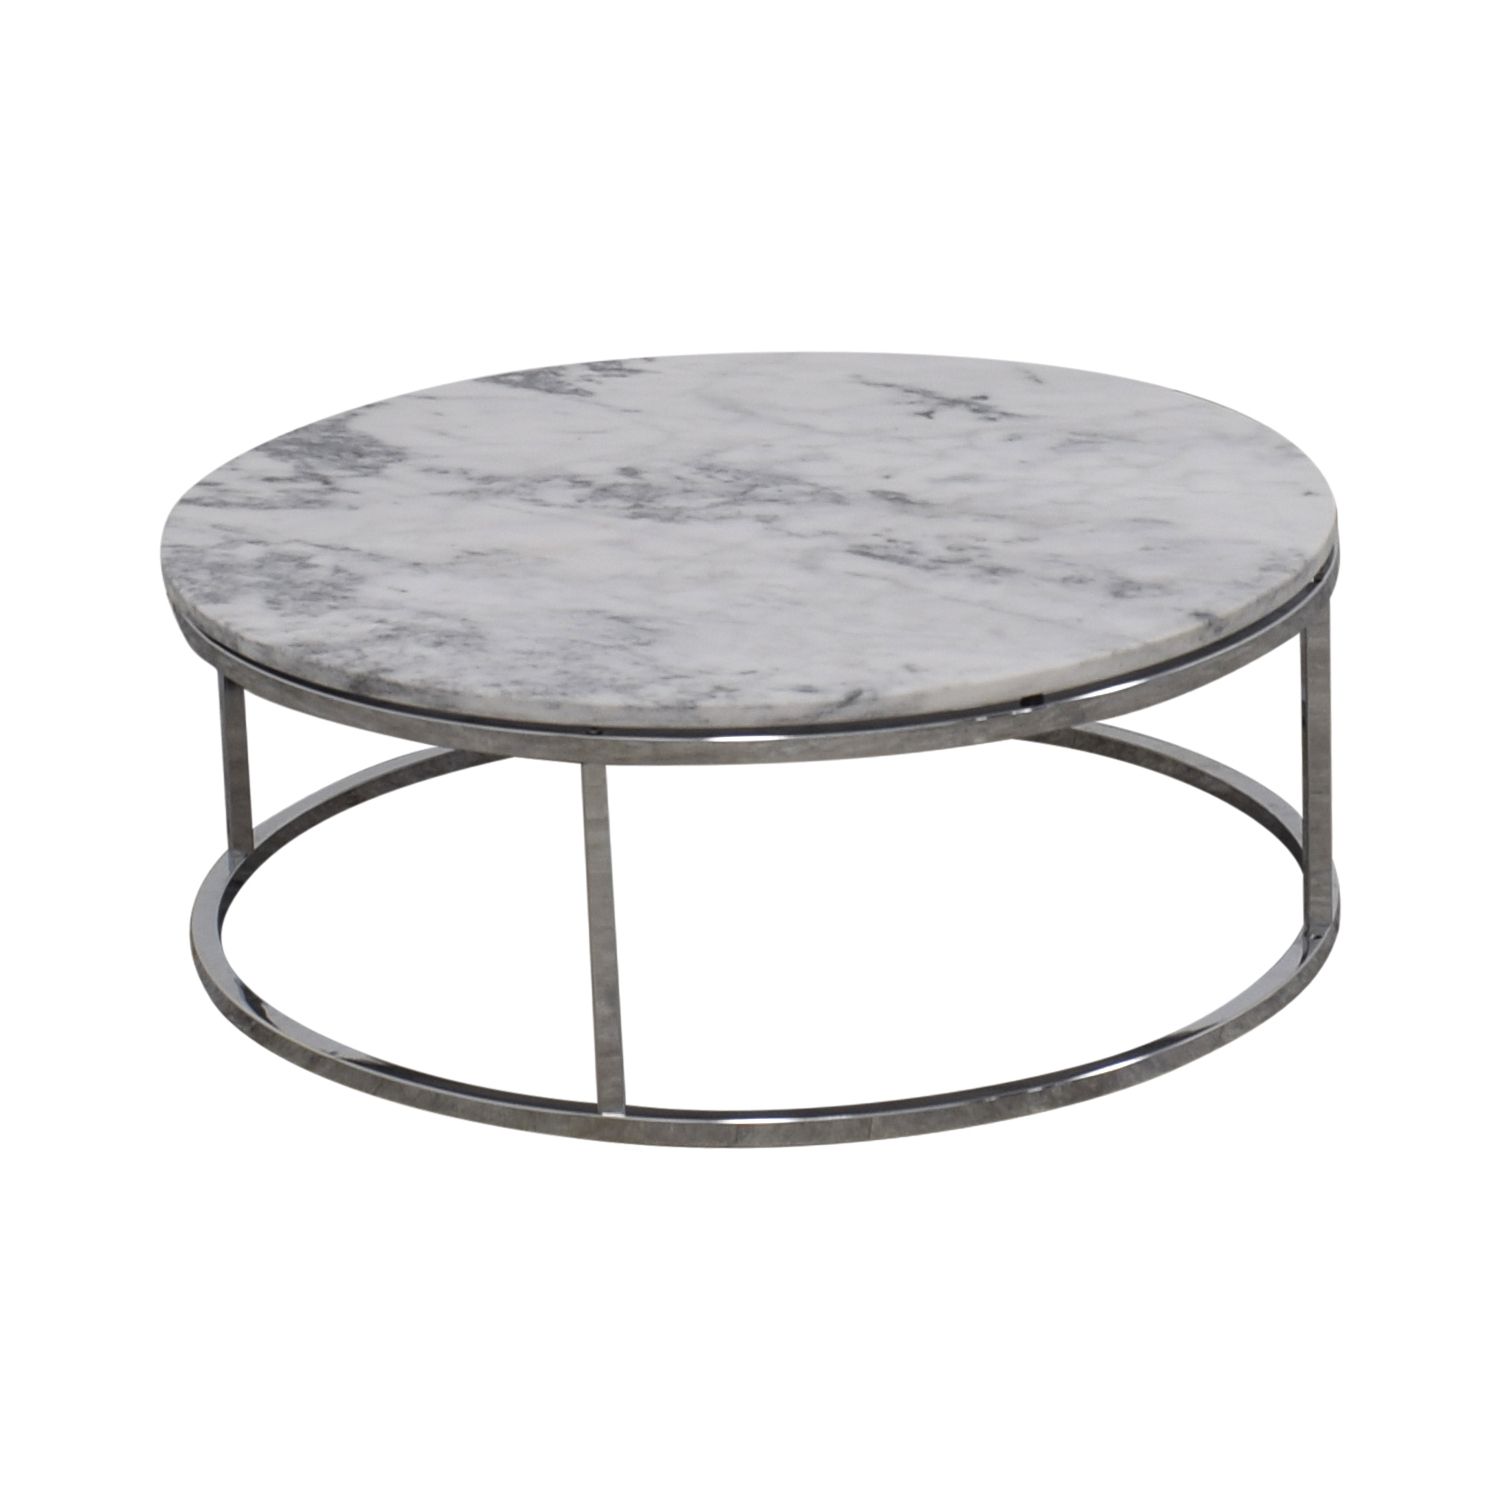 [%57% Off – Cb2 Cb2 Round White Marble Coffee Table / Tables With Regard To Fashionable Marble And White Coffee Tables|marble And White Coffee Tables For 2018 57% Off – Cb2 Cb2 Round White Marble Coffee Table / Tables|recent Marble And White Coffee Tables Inside 57% Off – Cb2 Cb2 Round White Marble Coffee Table / Tables|well Known 57% Off – Cb2 Cb2 Round White Marble Coffee Table / Tables With Marble And White Coffee Tables%] (View 5 of 20)